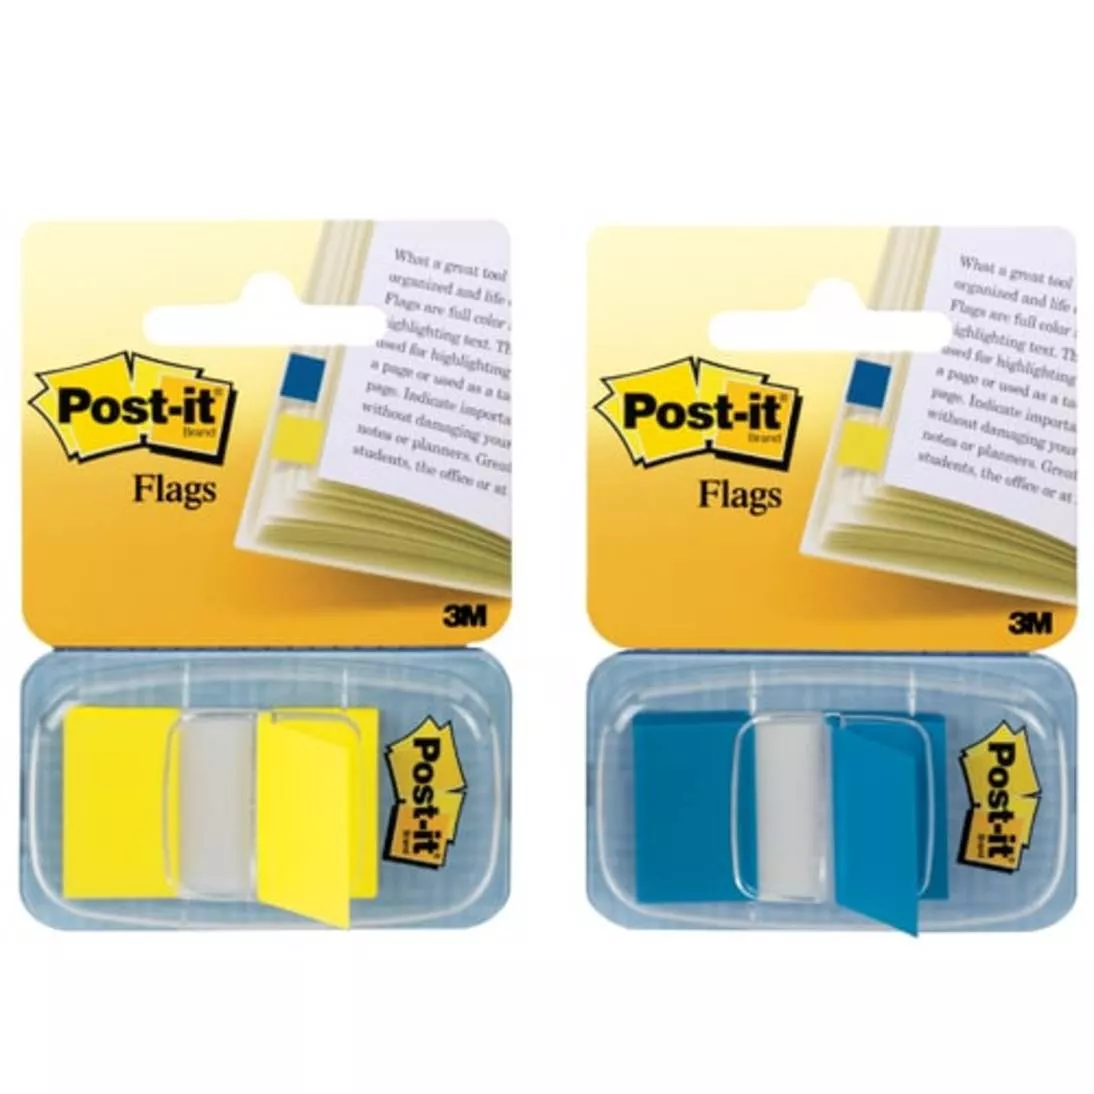 Post-it® Flags 680-1-D 1 in. x 1.7 in. Blue, Canary Yellow 1-Pack